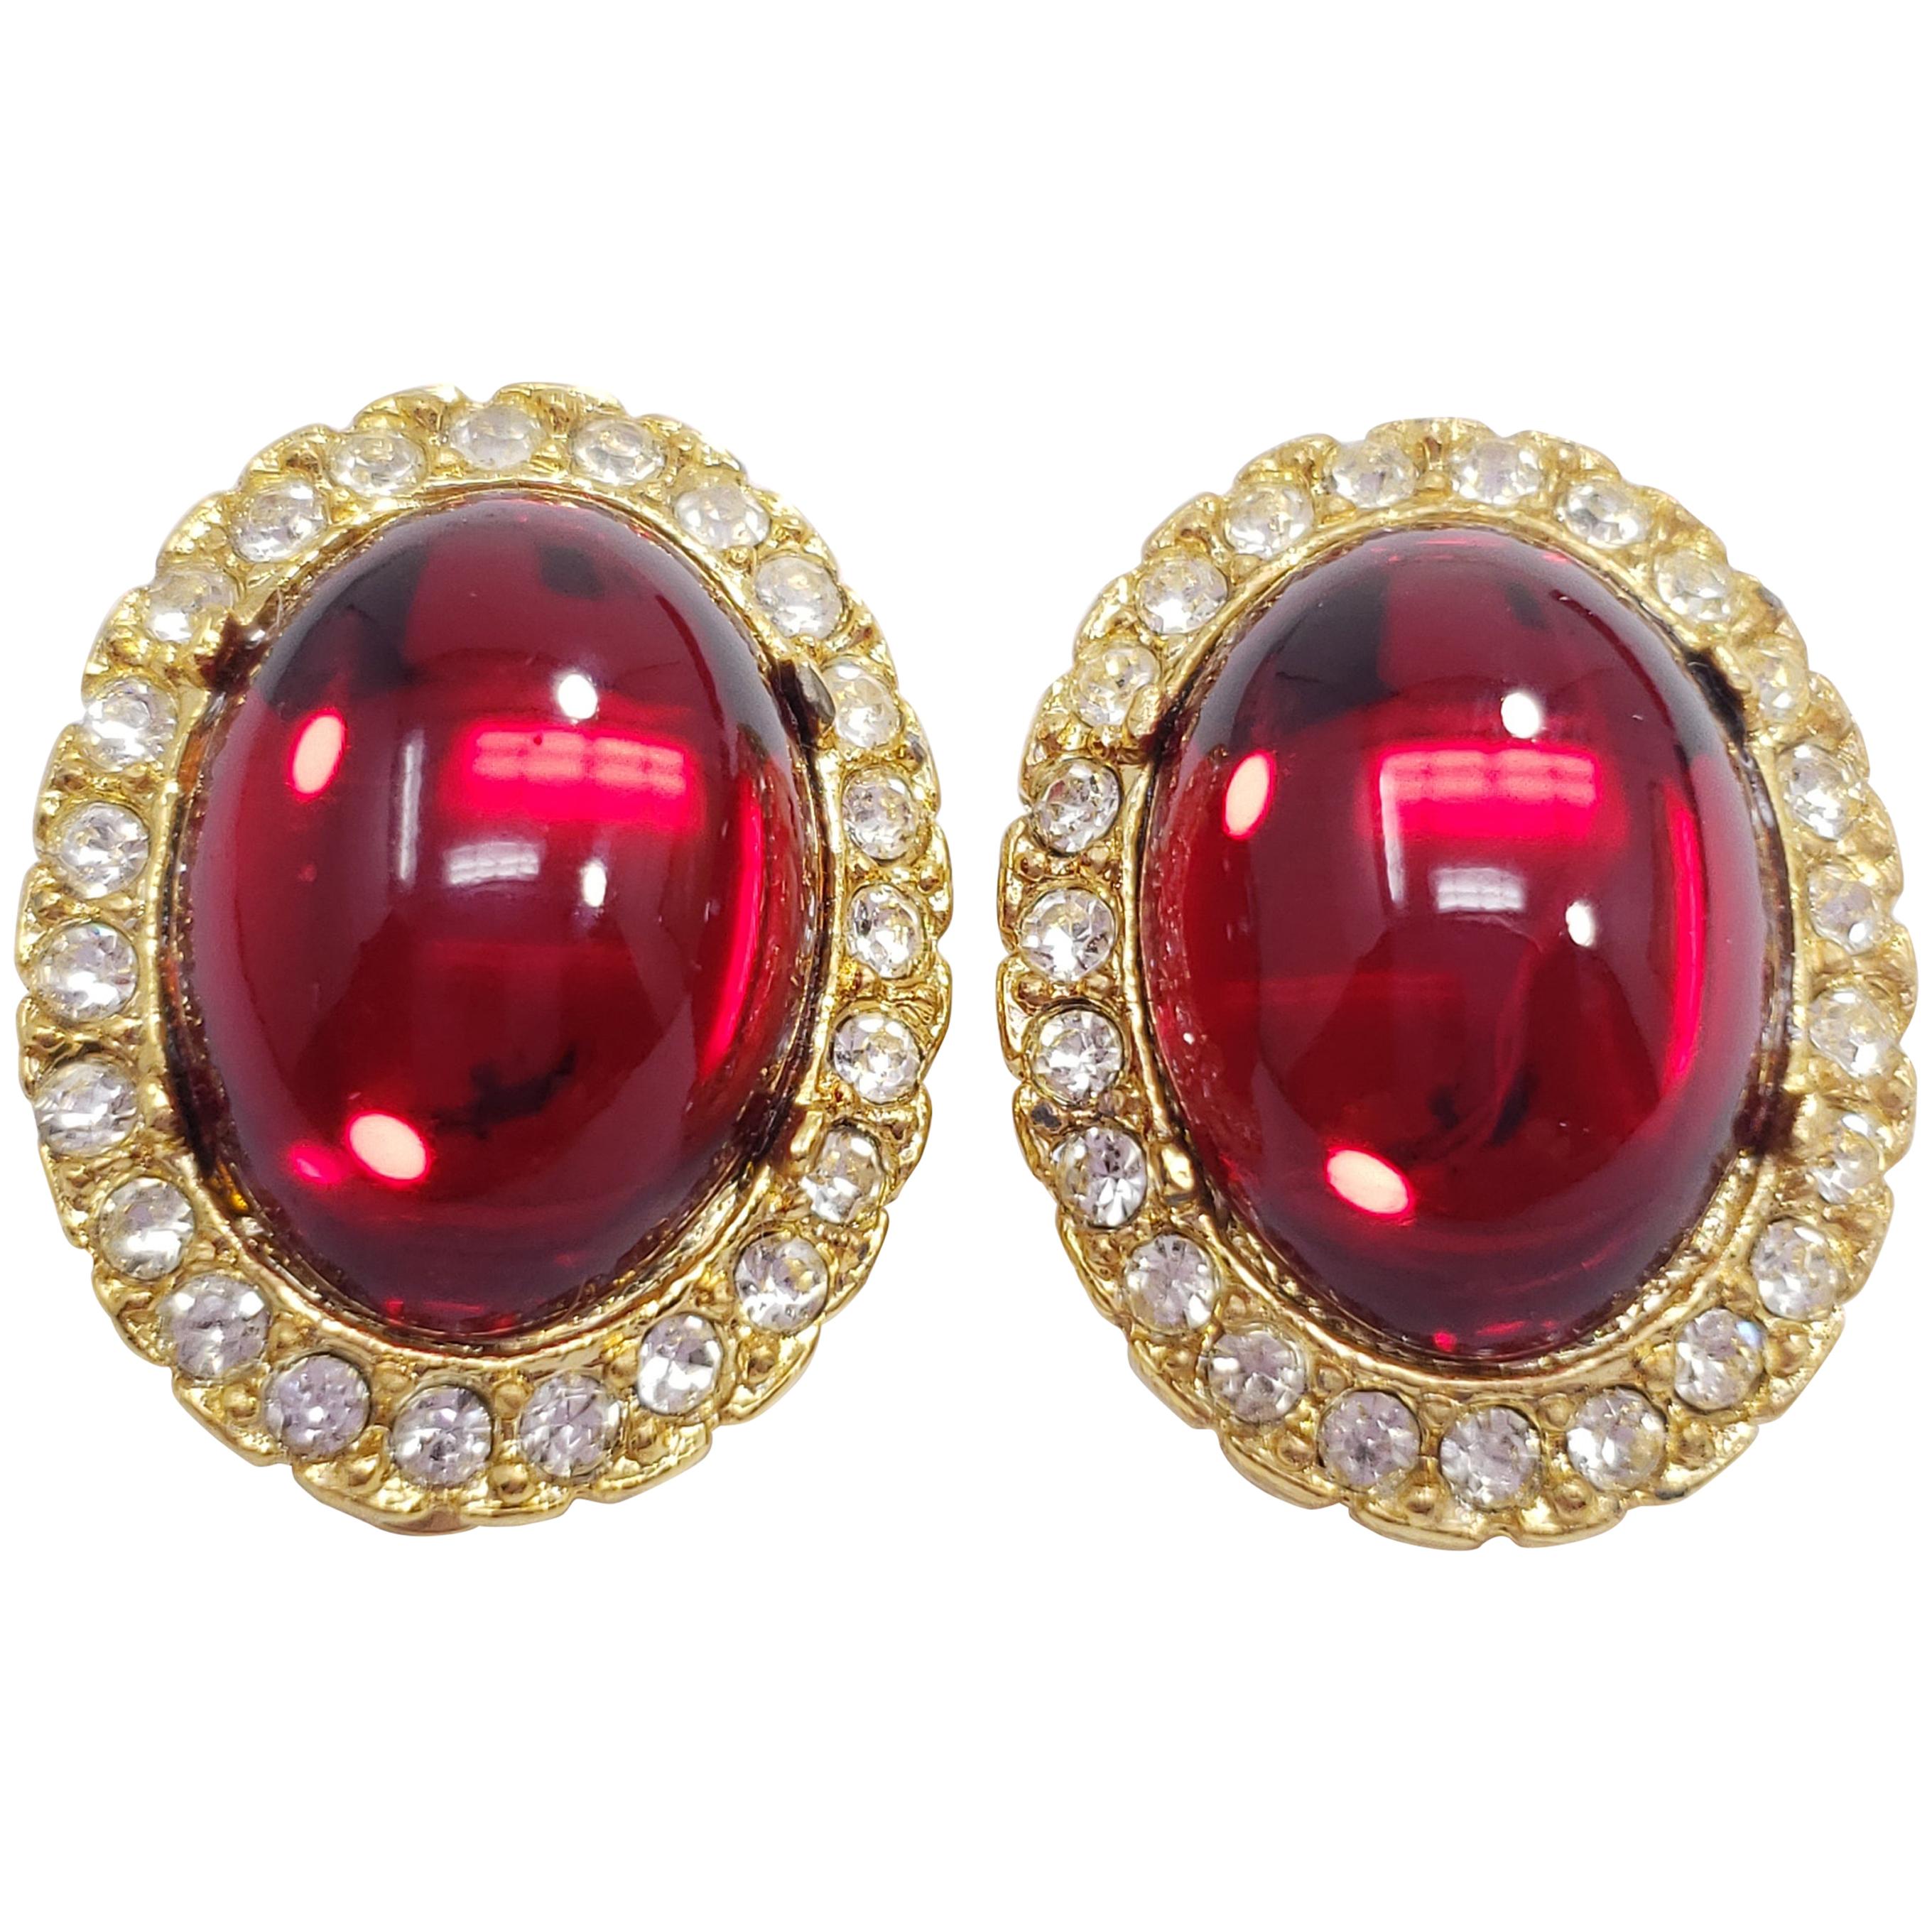 Vintage Cabochon Clip On Earrings In Gold, Ruby and Clear Crystals, 20th Century